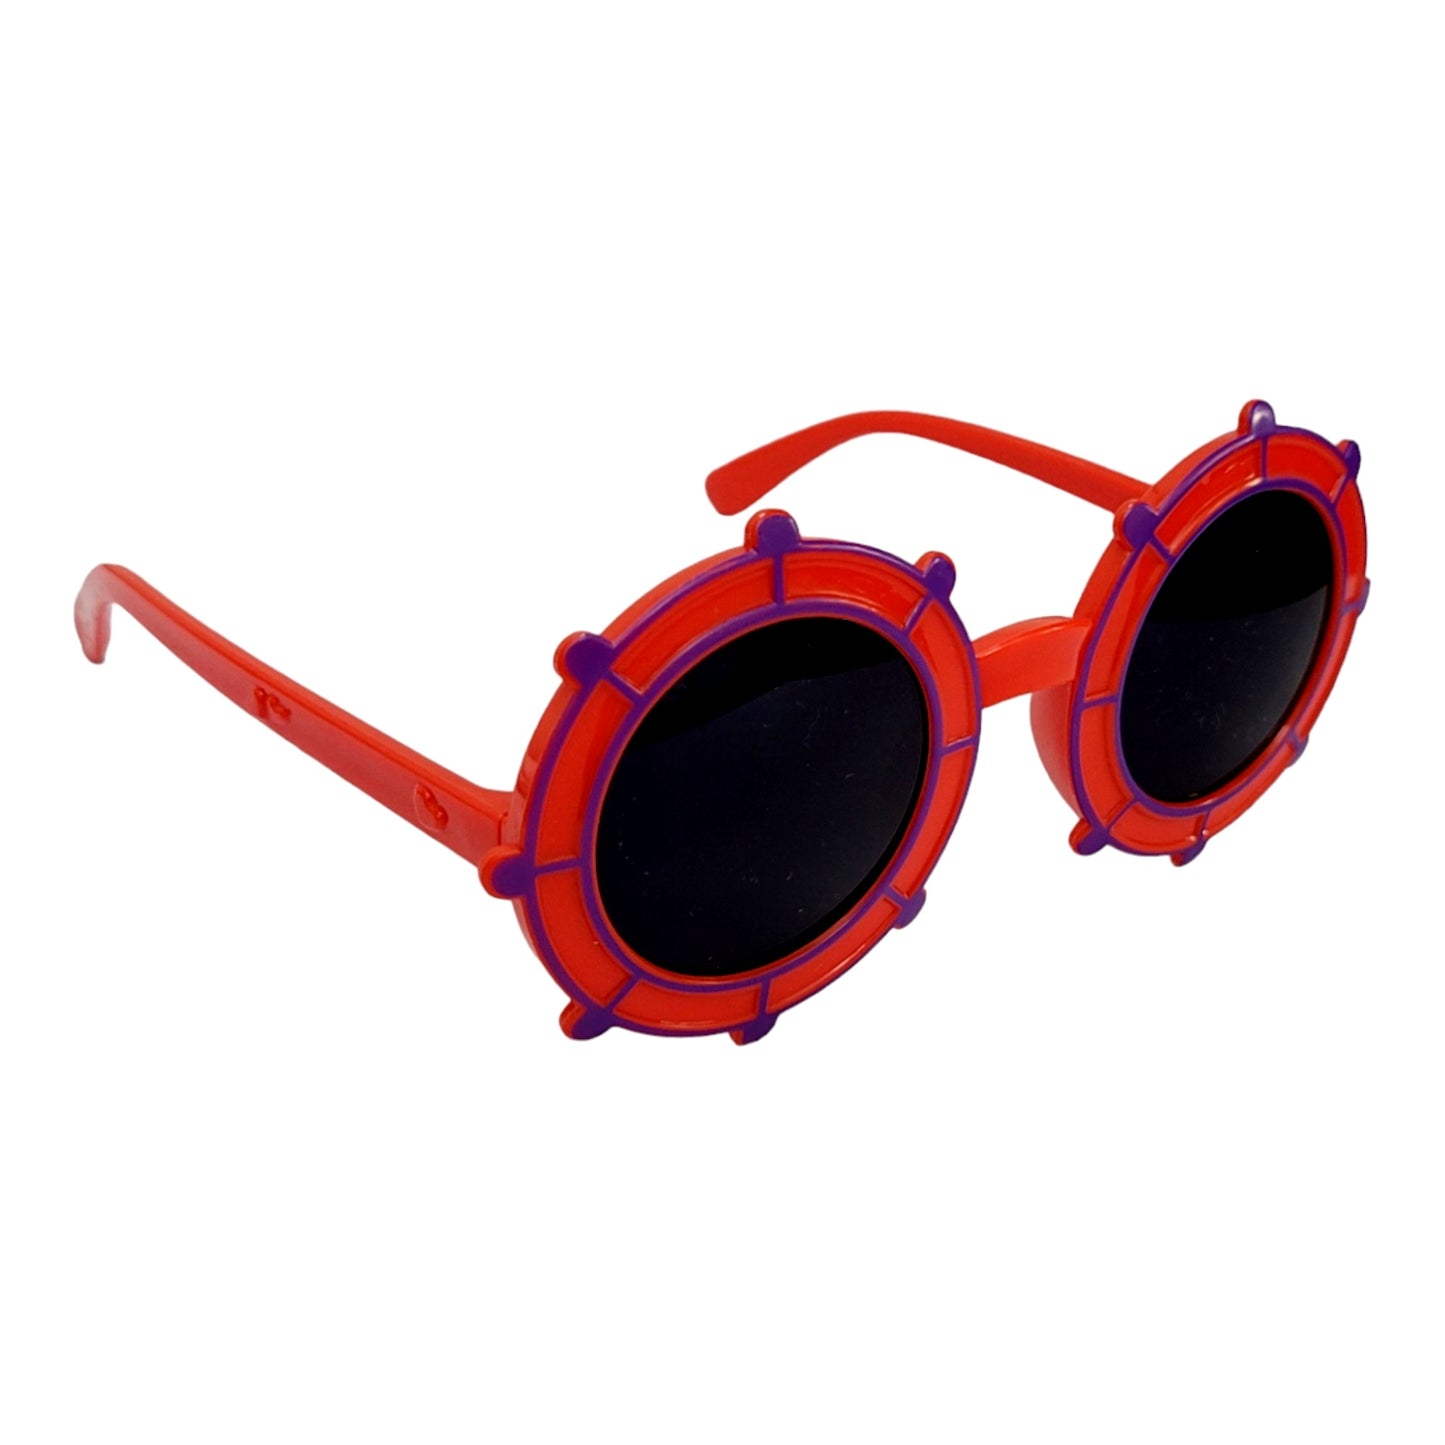 Round Shape Sunglasses for kids - UV Protected Sunglasses - ( 3yrs to 8yrs ) – affaires-2040-Red